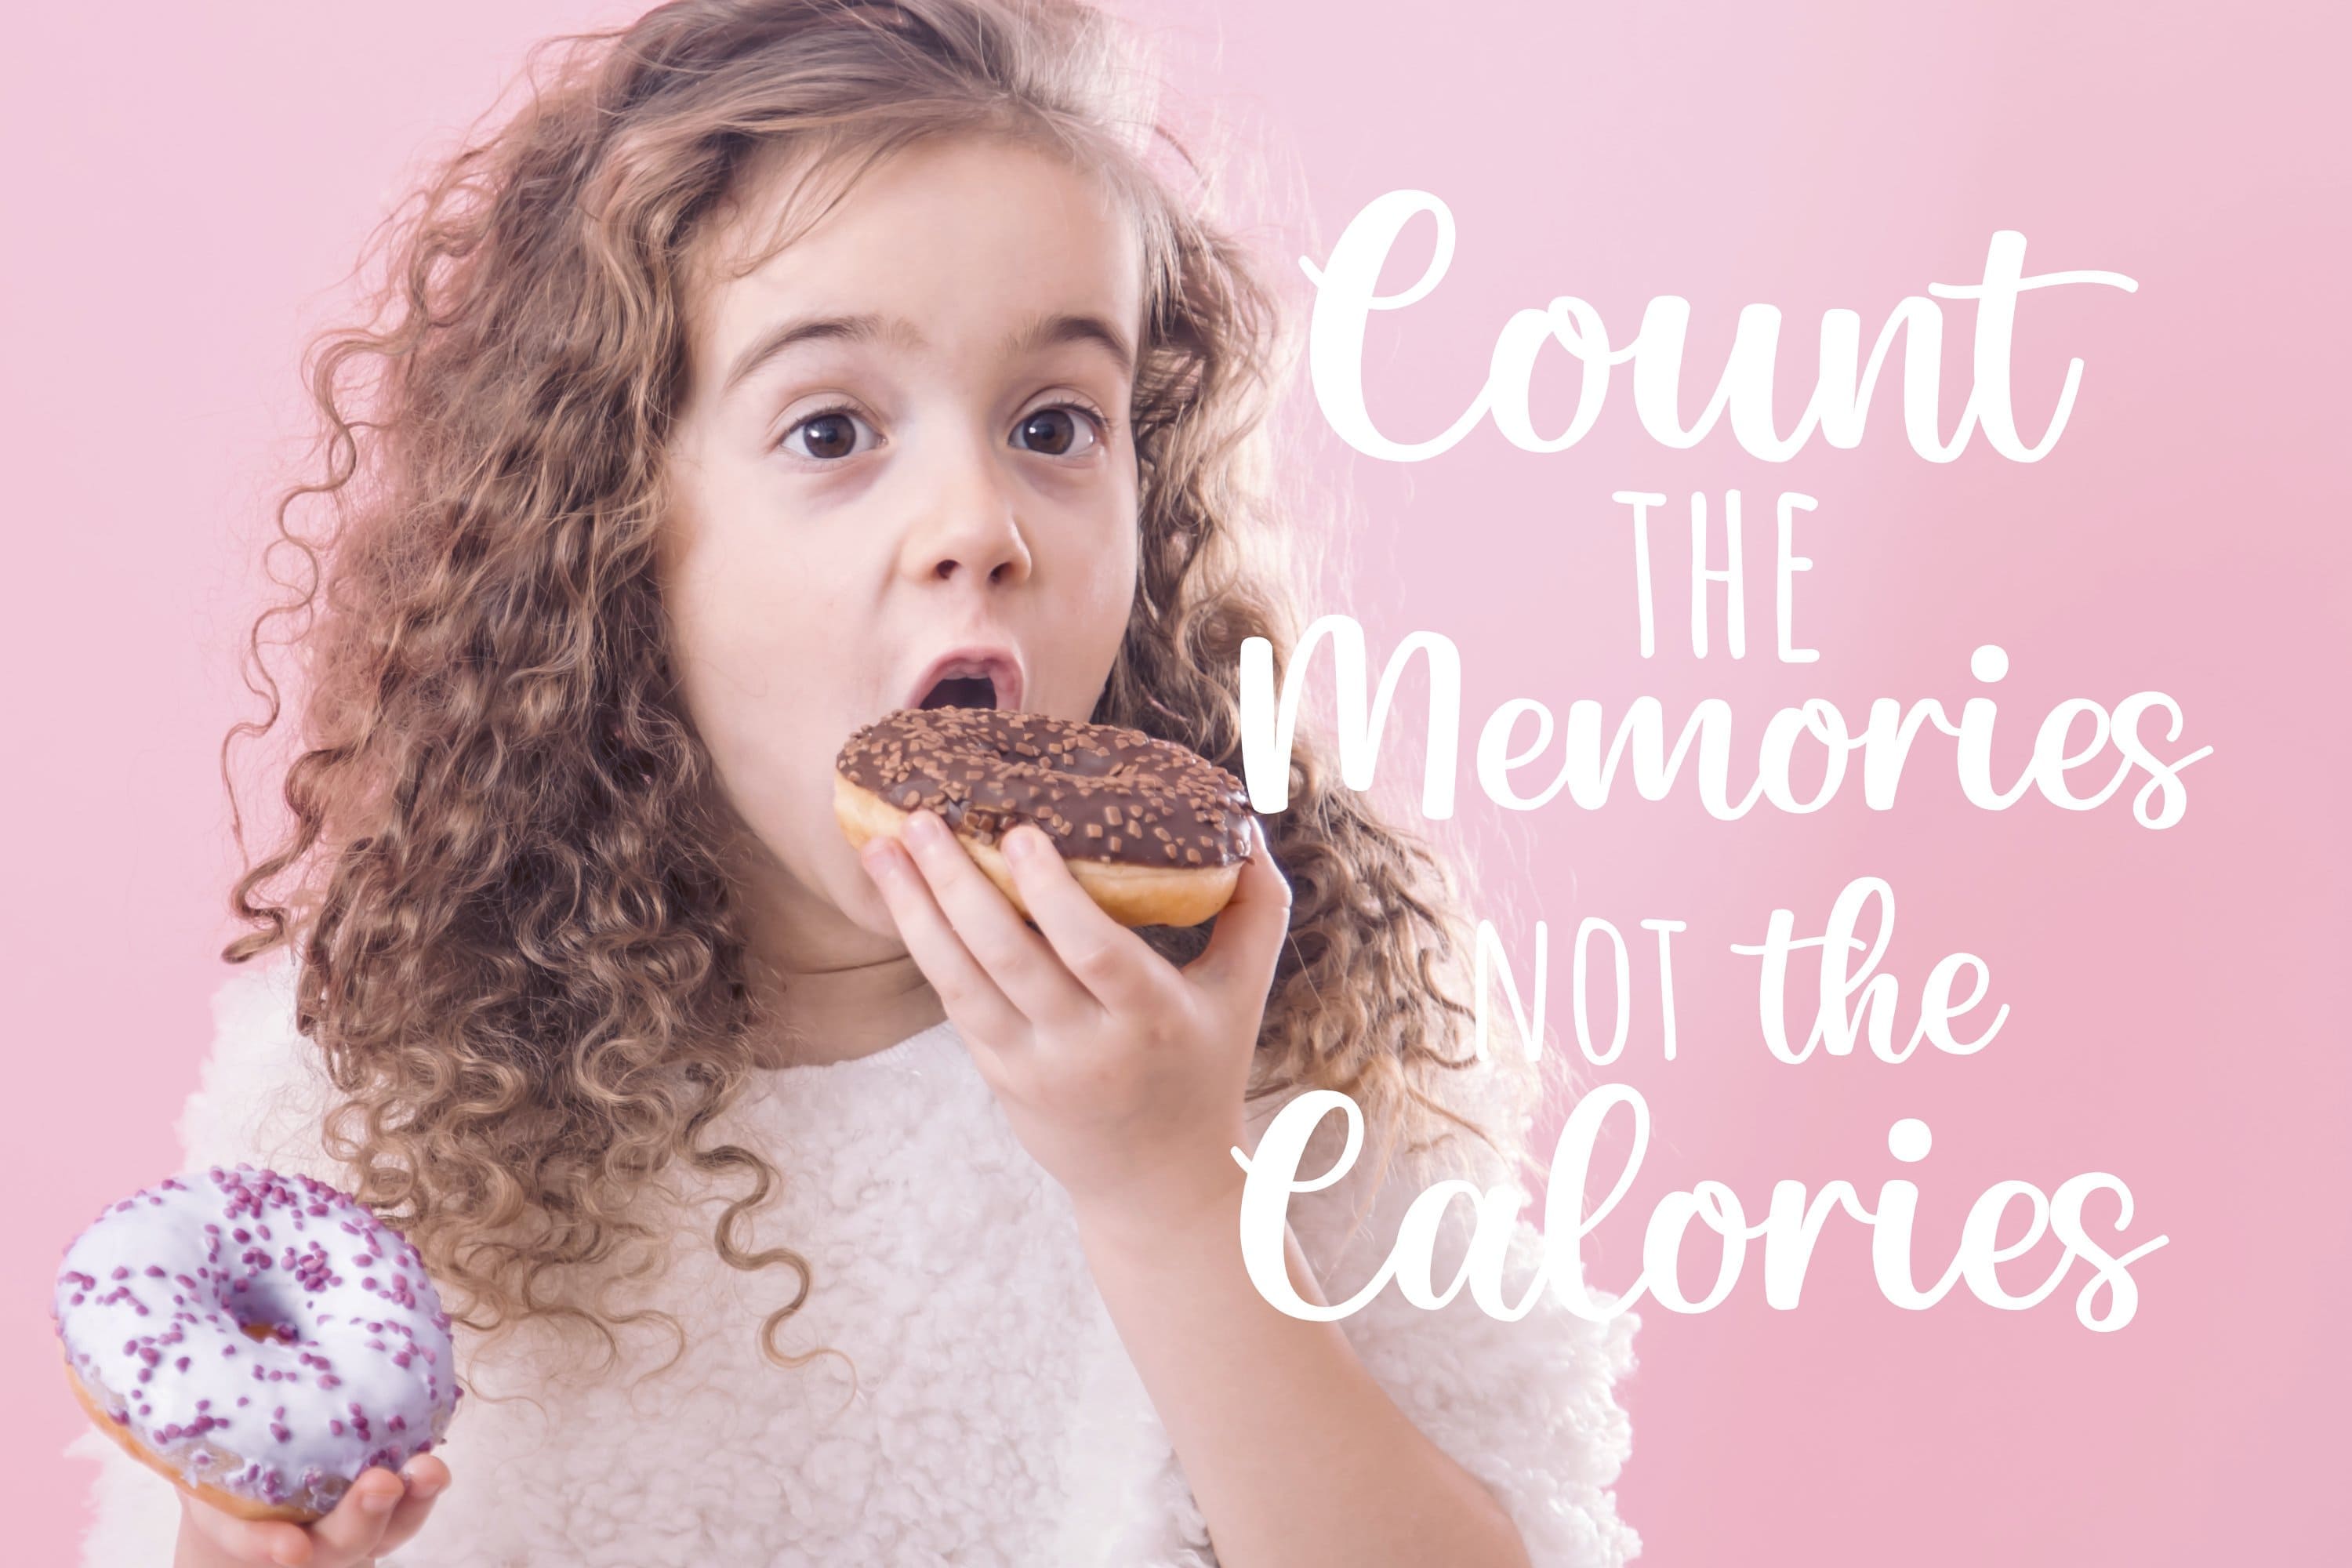 A girl tastes a "Count the Memories not the Calories" donut.